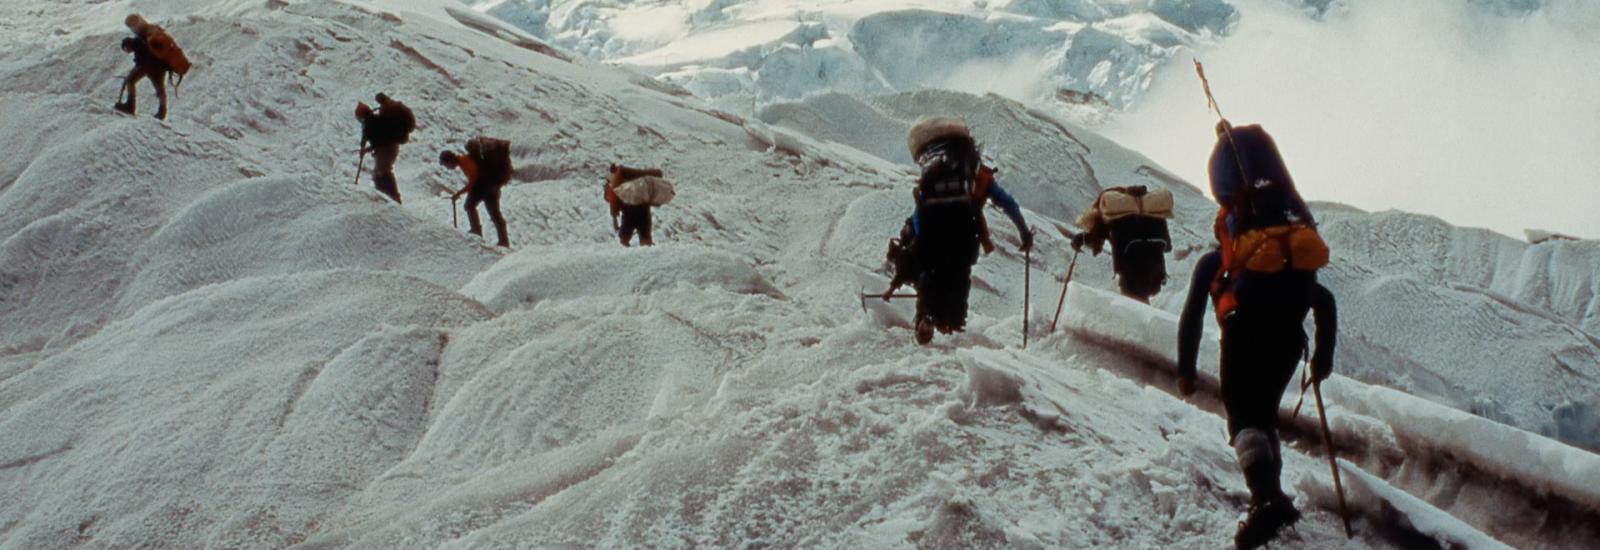 People walking up a mountain on ice carrying climbing gear surrounded by snow and mountains.